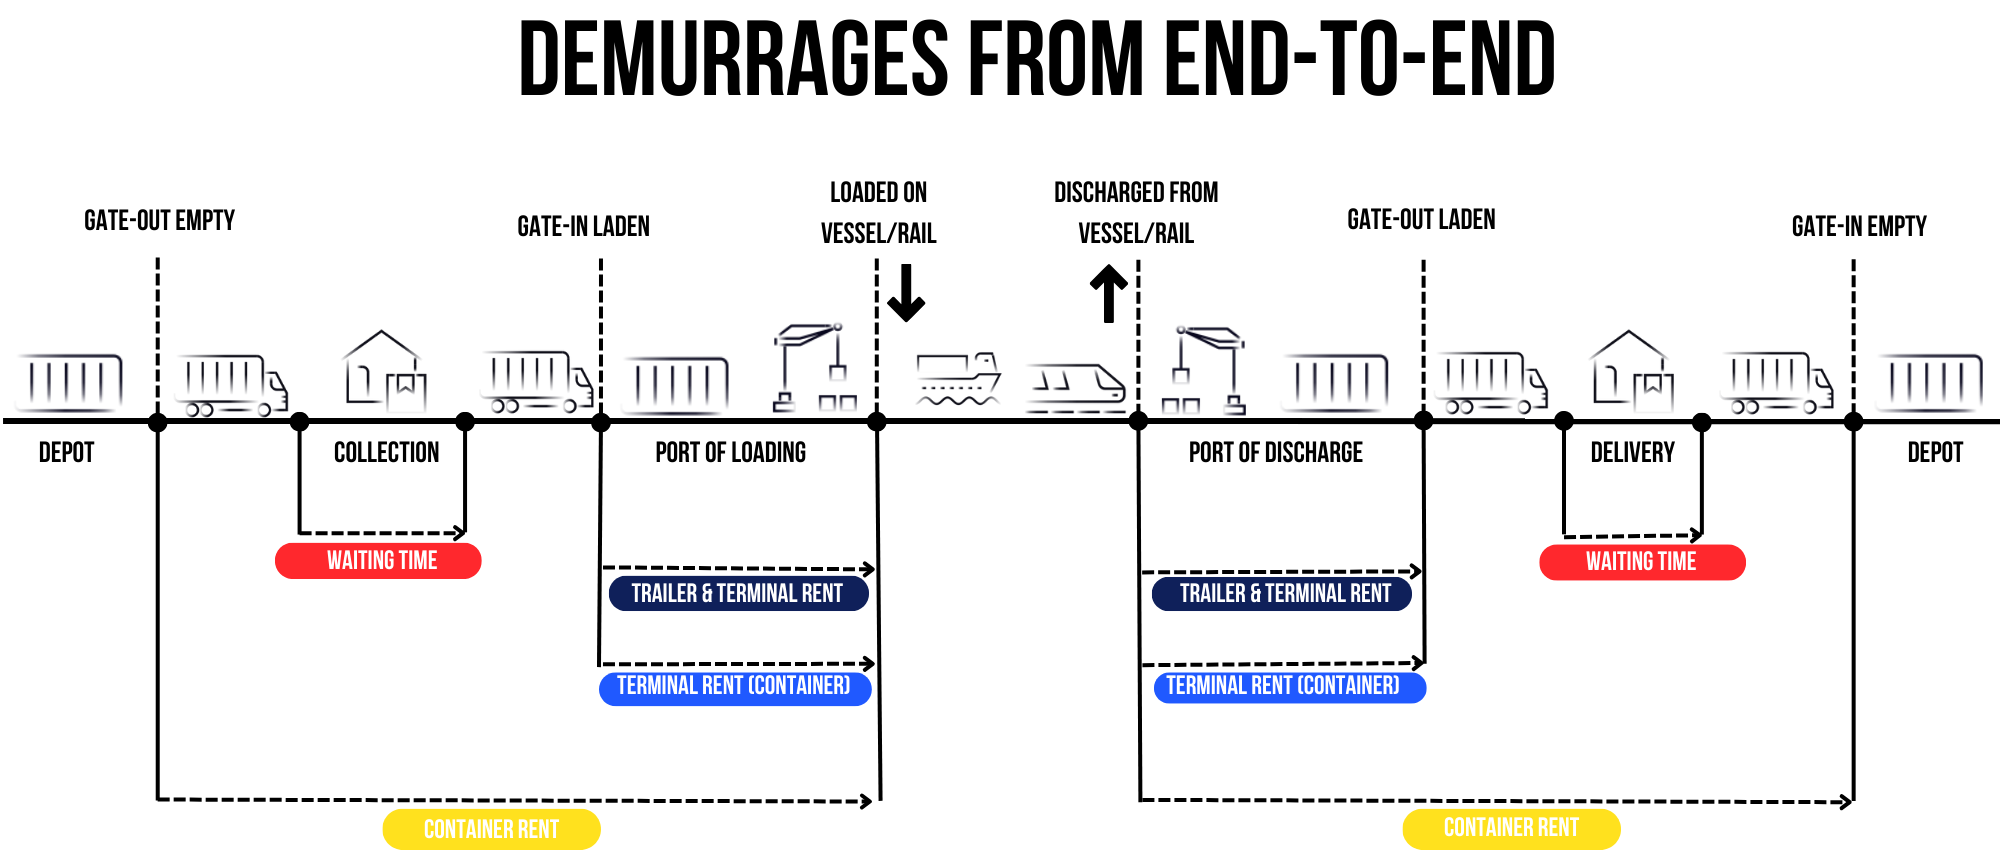 Demurrage costs end-to-end-1